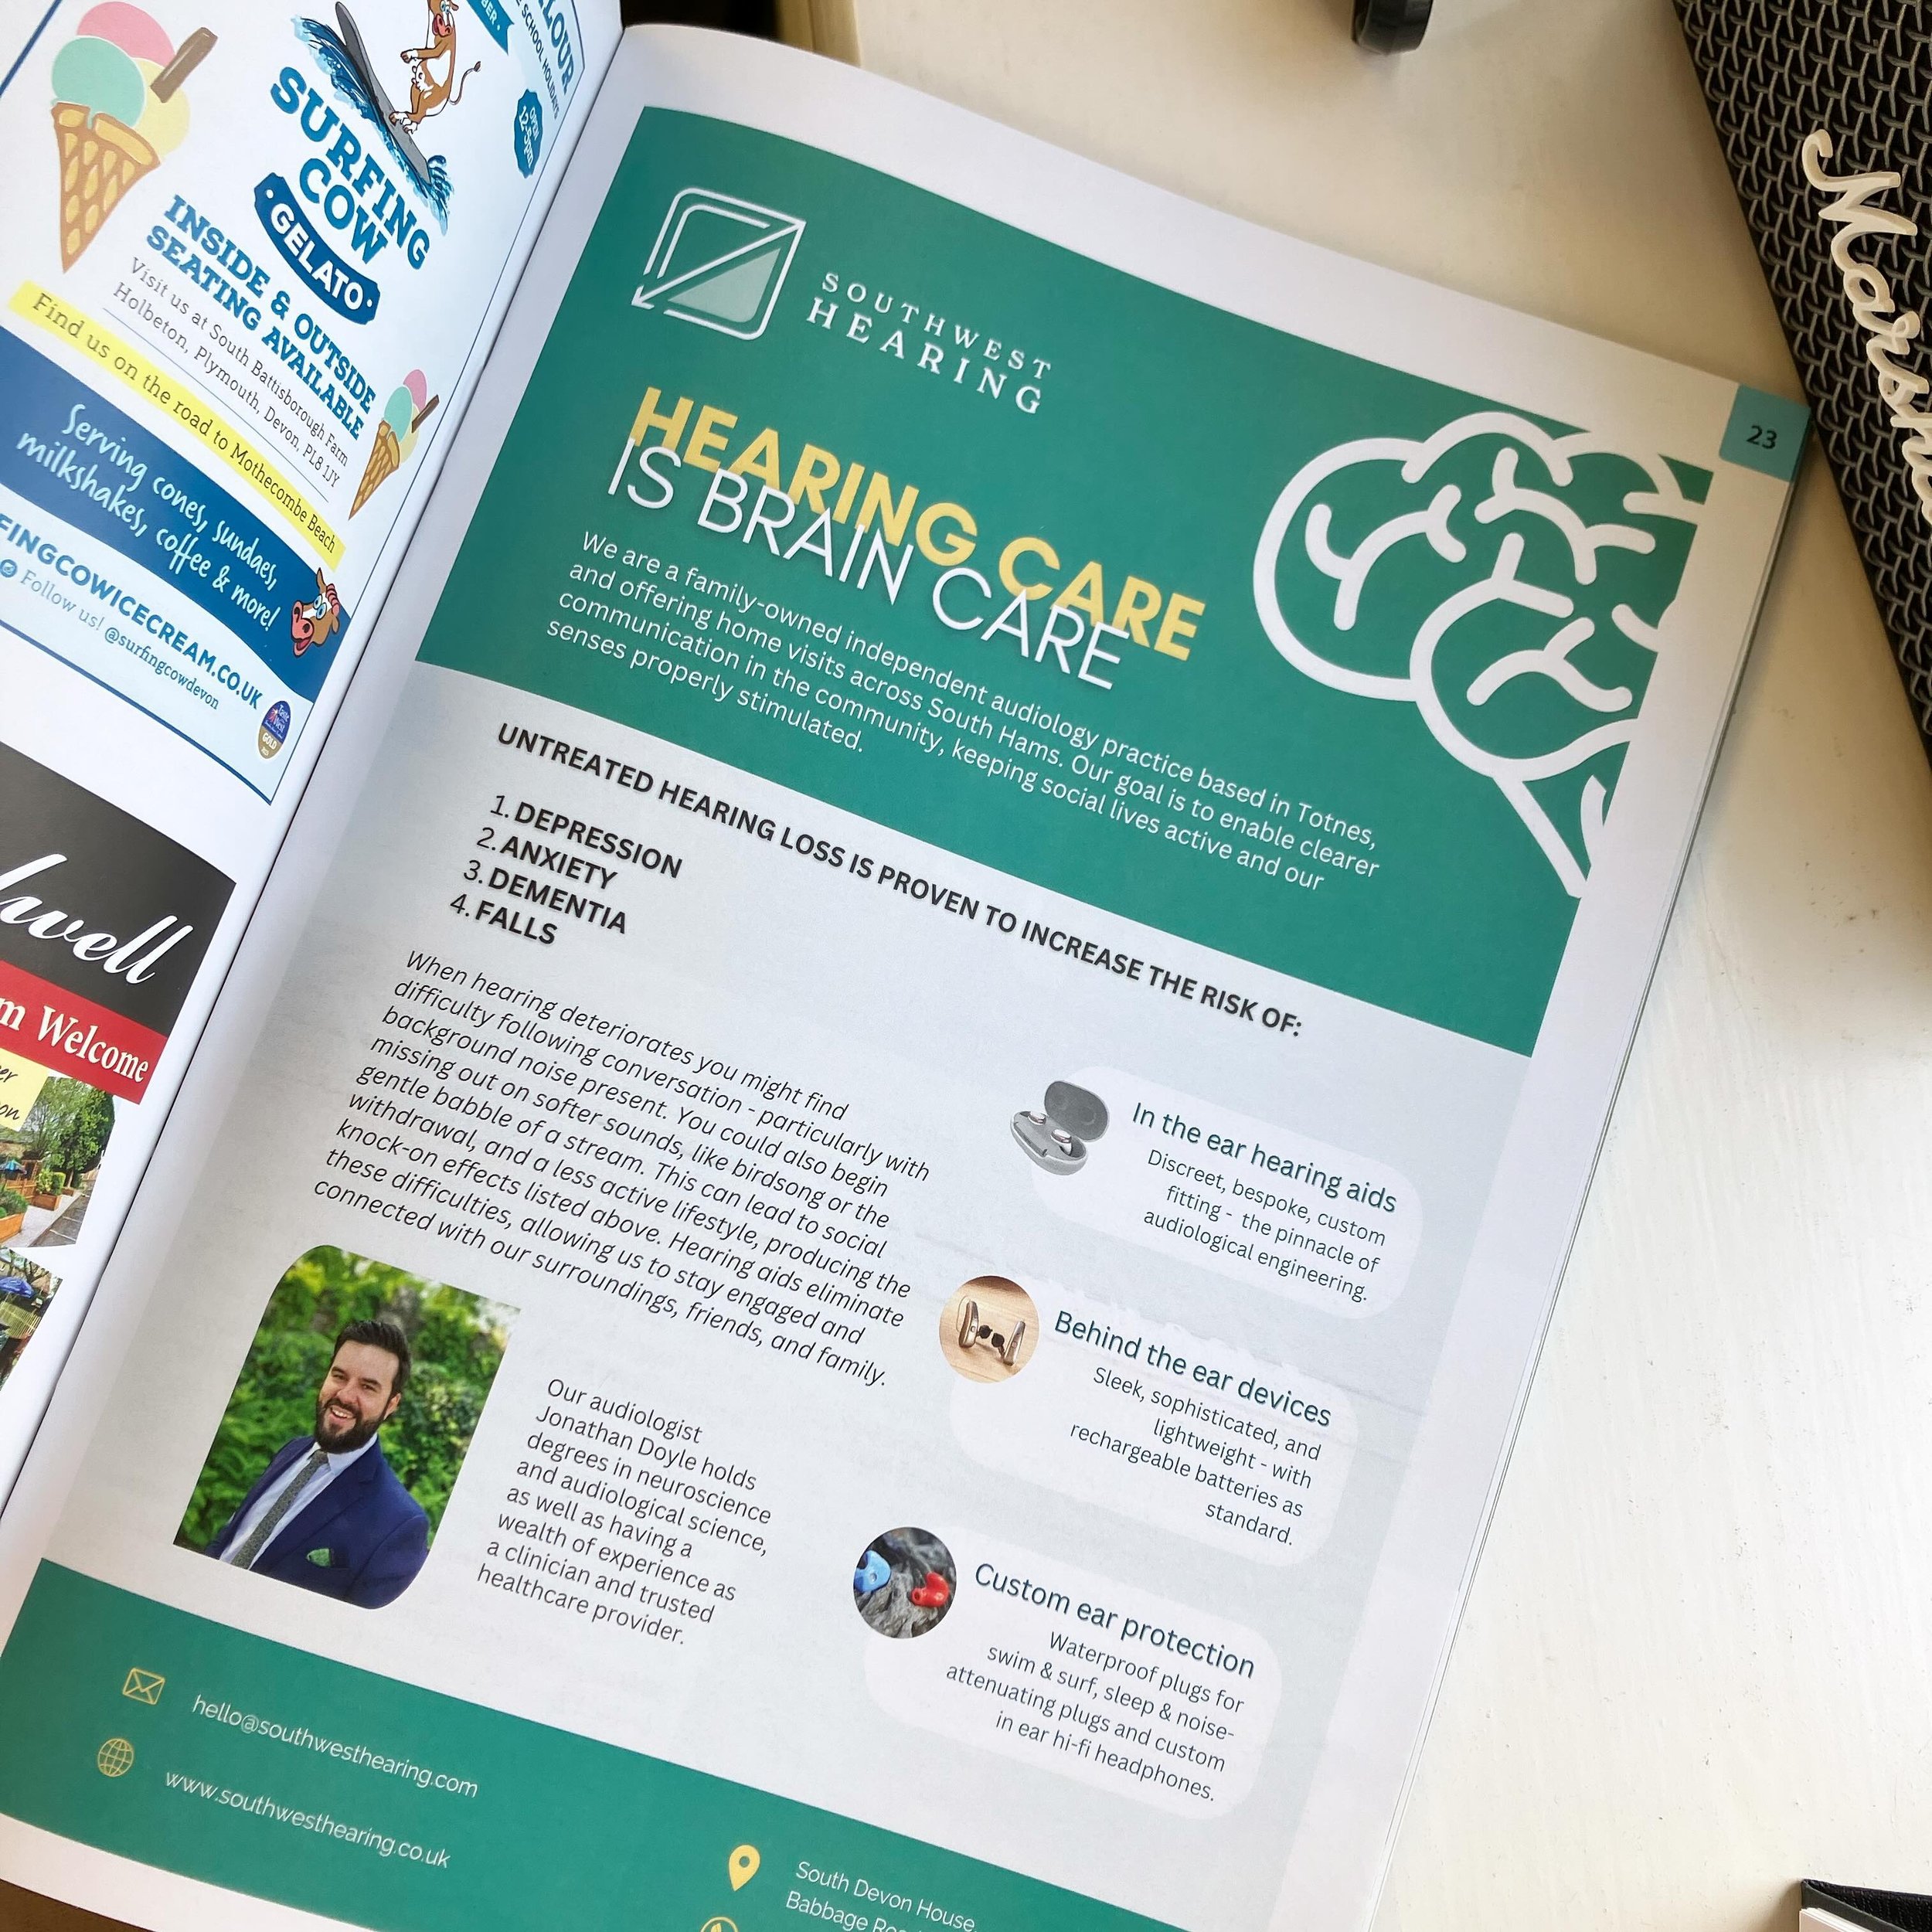 So pleased to be featured in this month&rsquo;s issue of @bythedart magazine, addressing the importance of audiology in maintaining good brain health for years to come! 🧠

If you / anyone you know are struggling with hearing or balance, come and vis